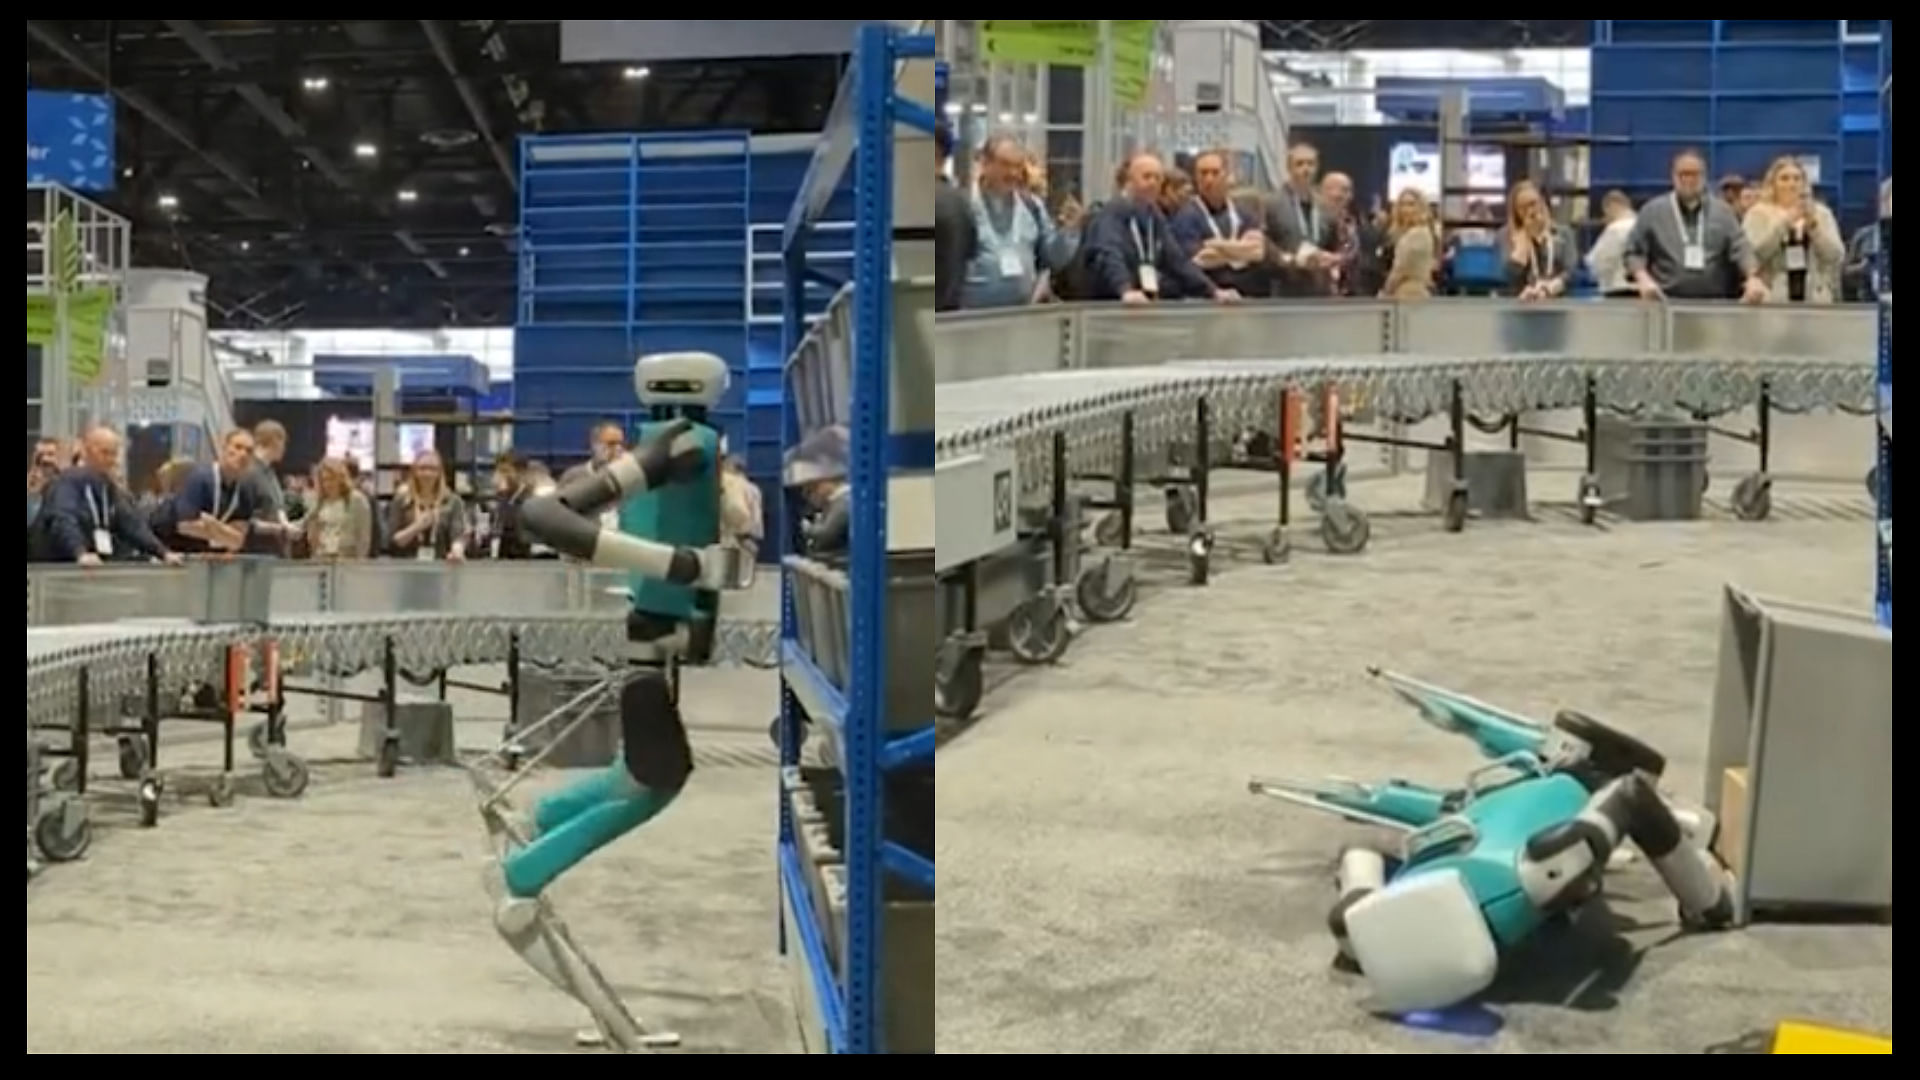 Robot collapses after 20 hour work old  video goes viral on social media